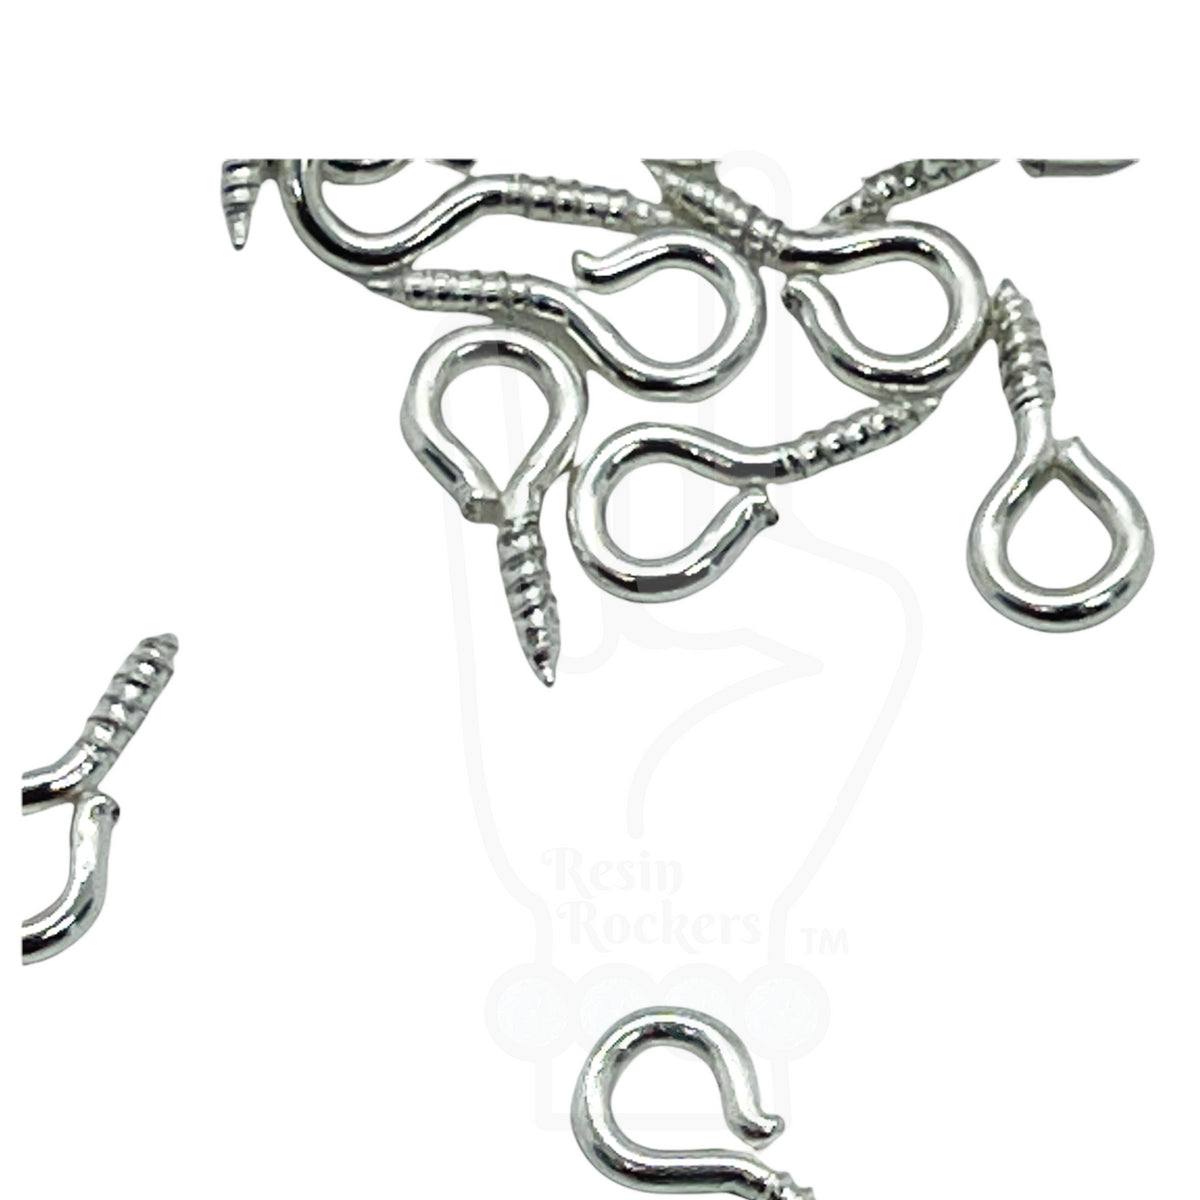 Tiny Stainless Steel Eyehook Screw Pins for Pen Charms